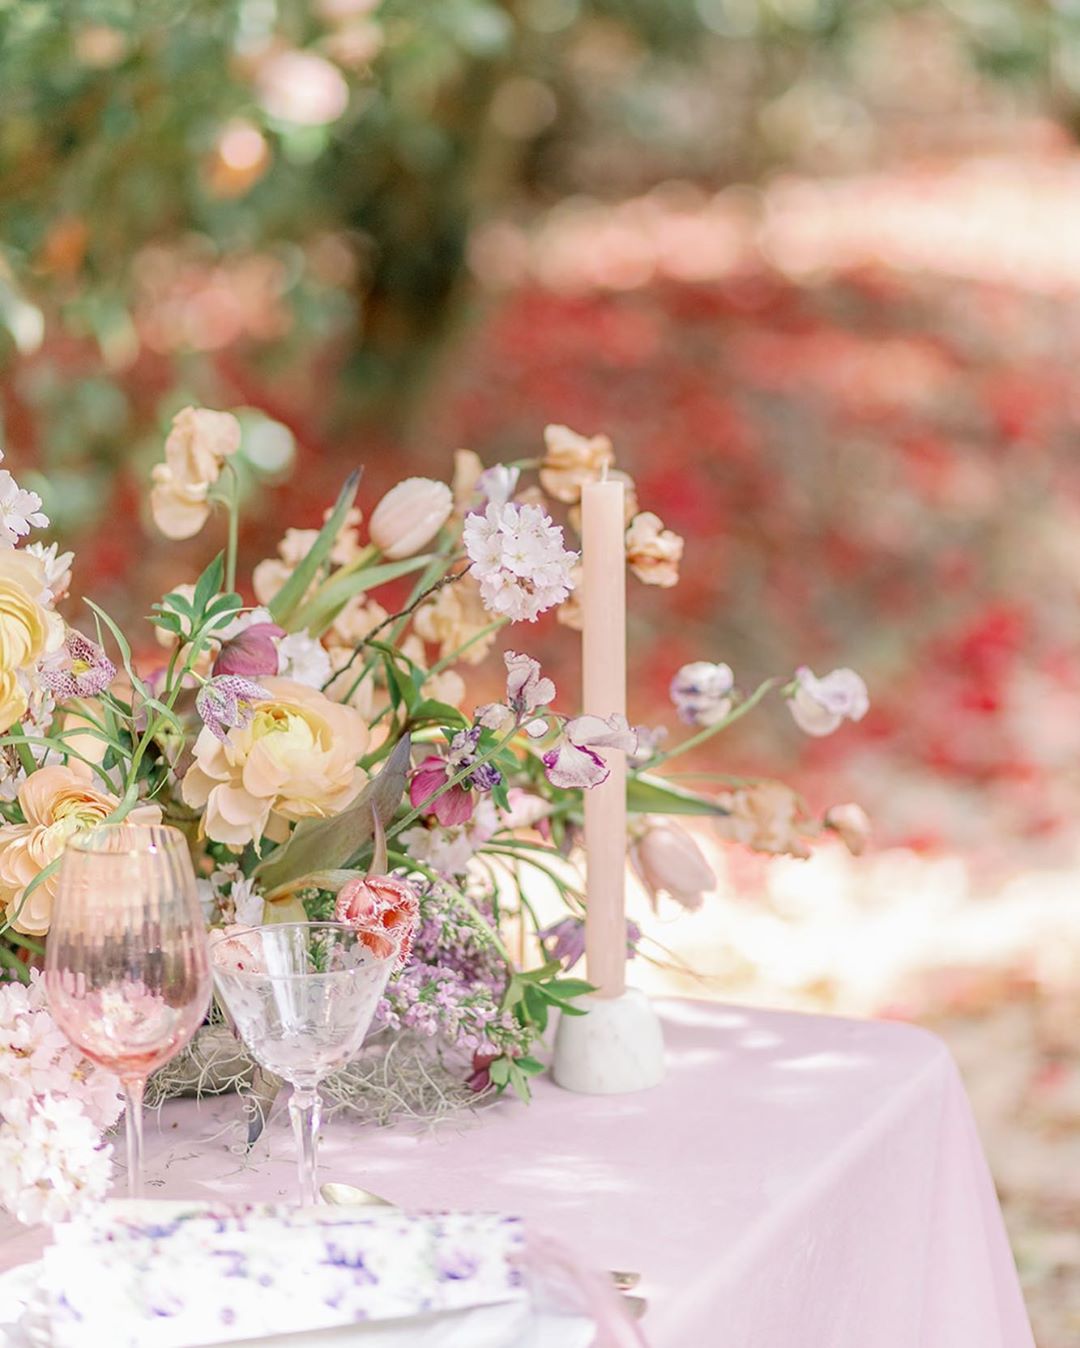 Peach, violet and butter garden wedding centerpiece on a pink velvet table at Middleton Place, captured by Sacia Matthews Photography and styled by Willow and Oak Events